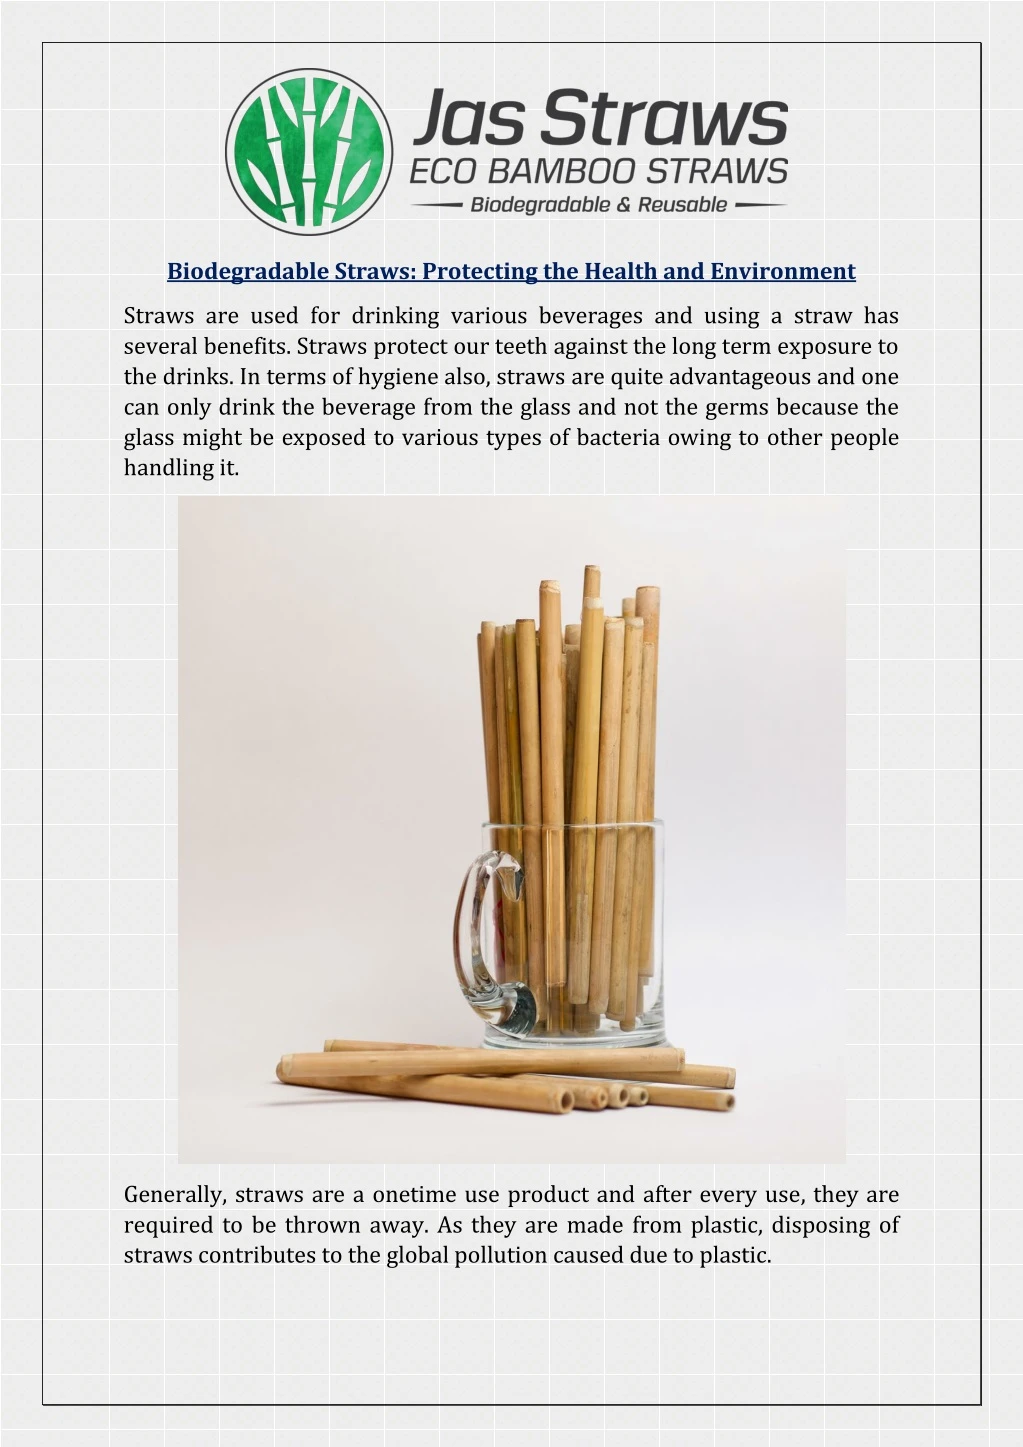 biodegradable straws protecting the health